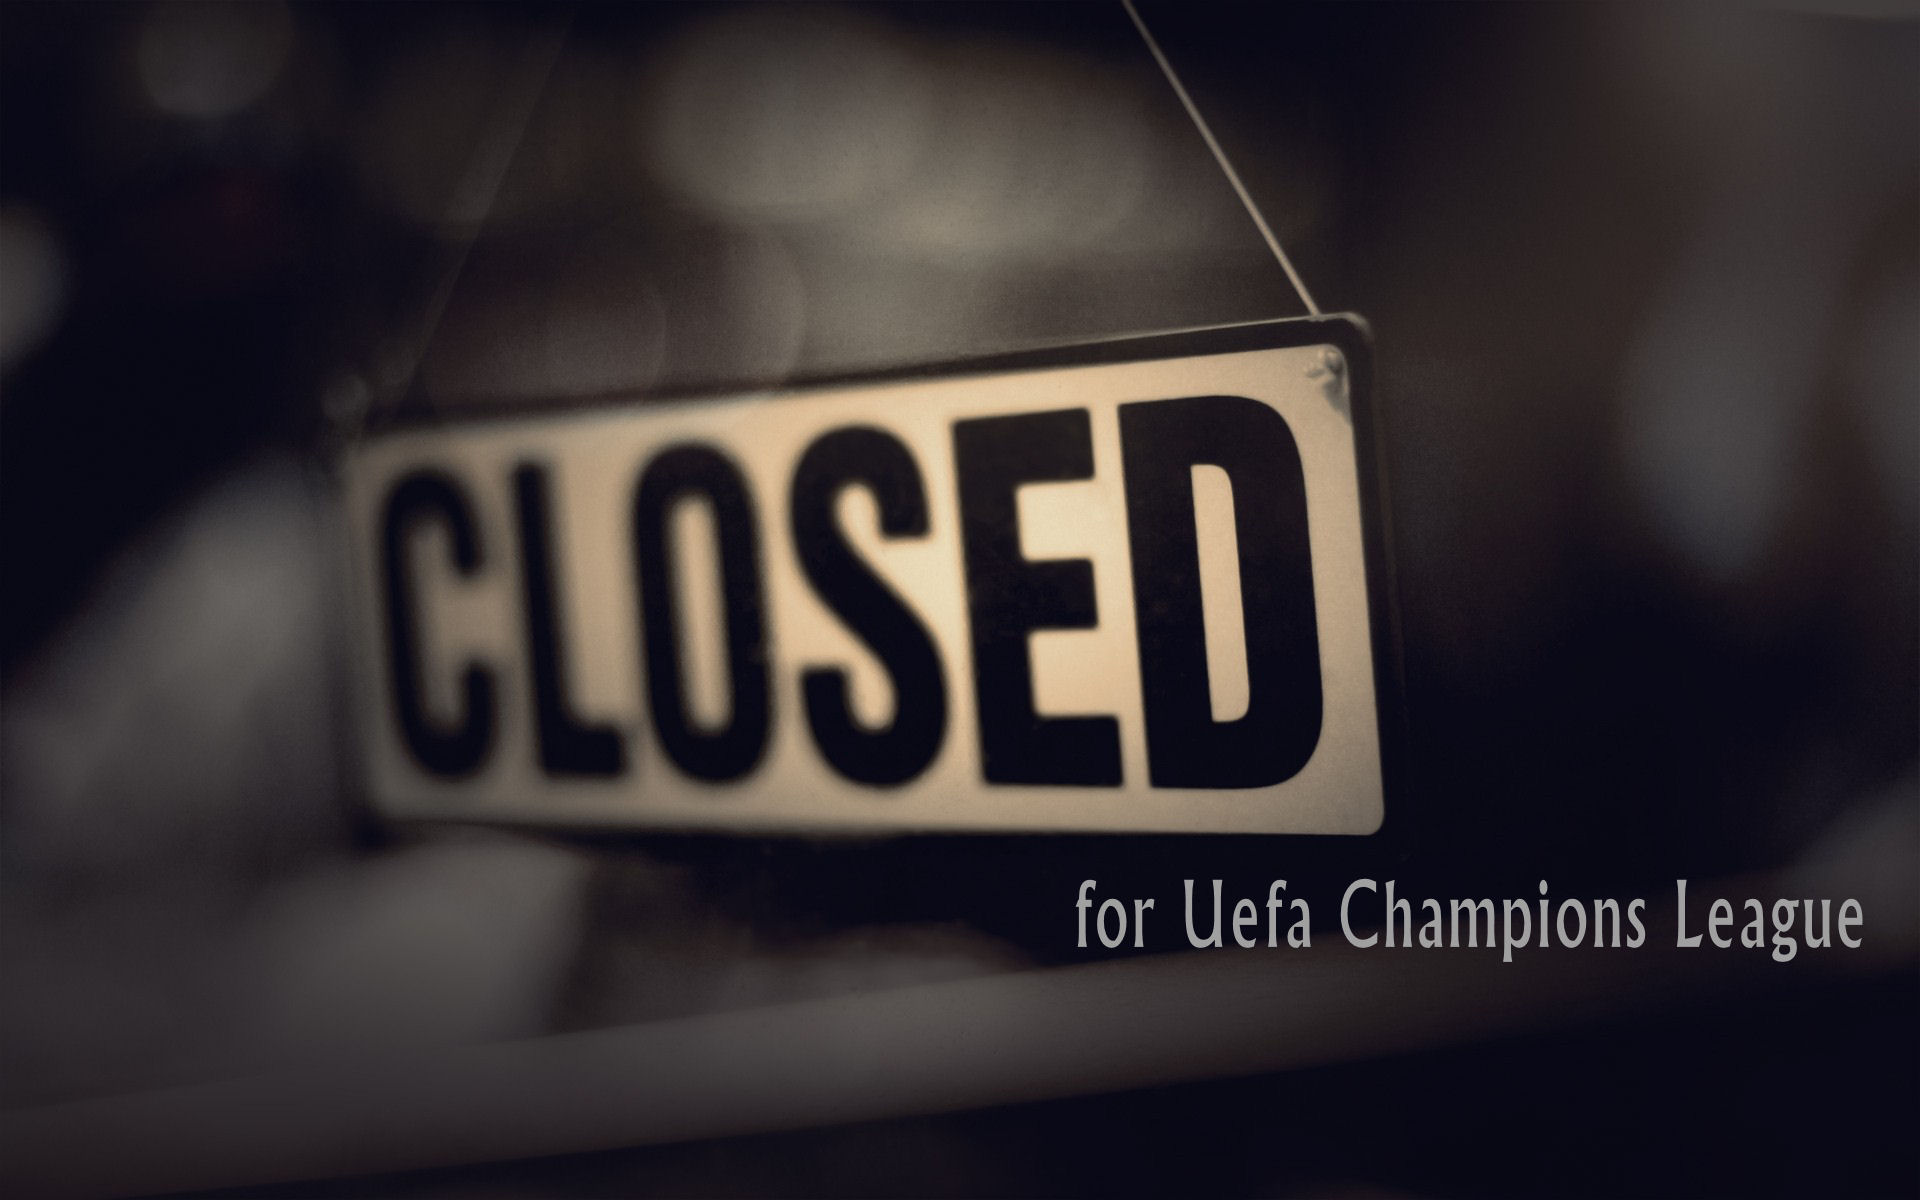 CLOSED FOR CHAMPIONS!!!